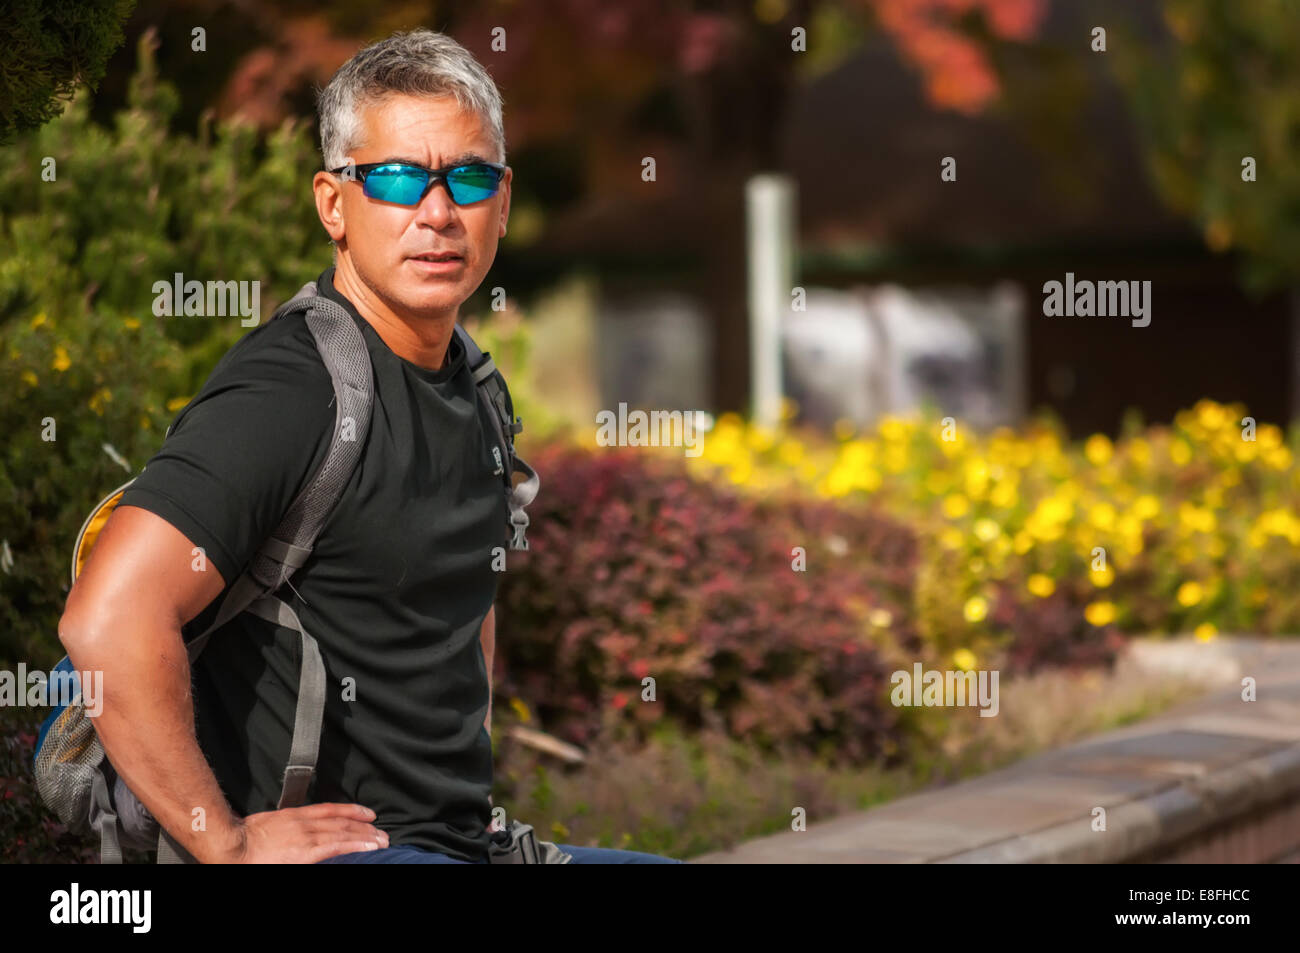 Portrait of a man wearing fitness clothing Stock Photo